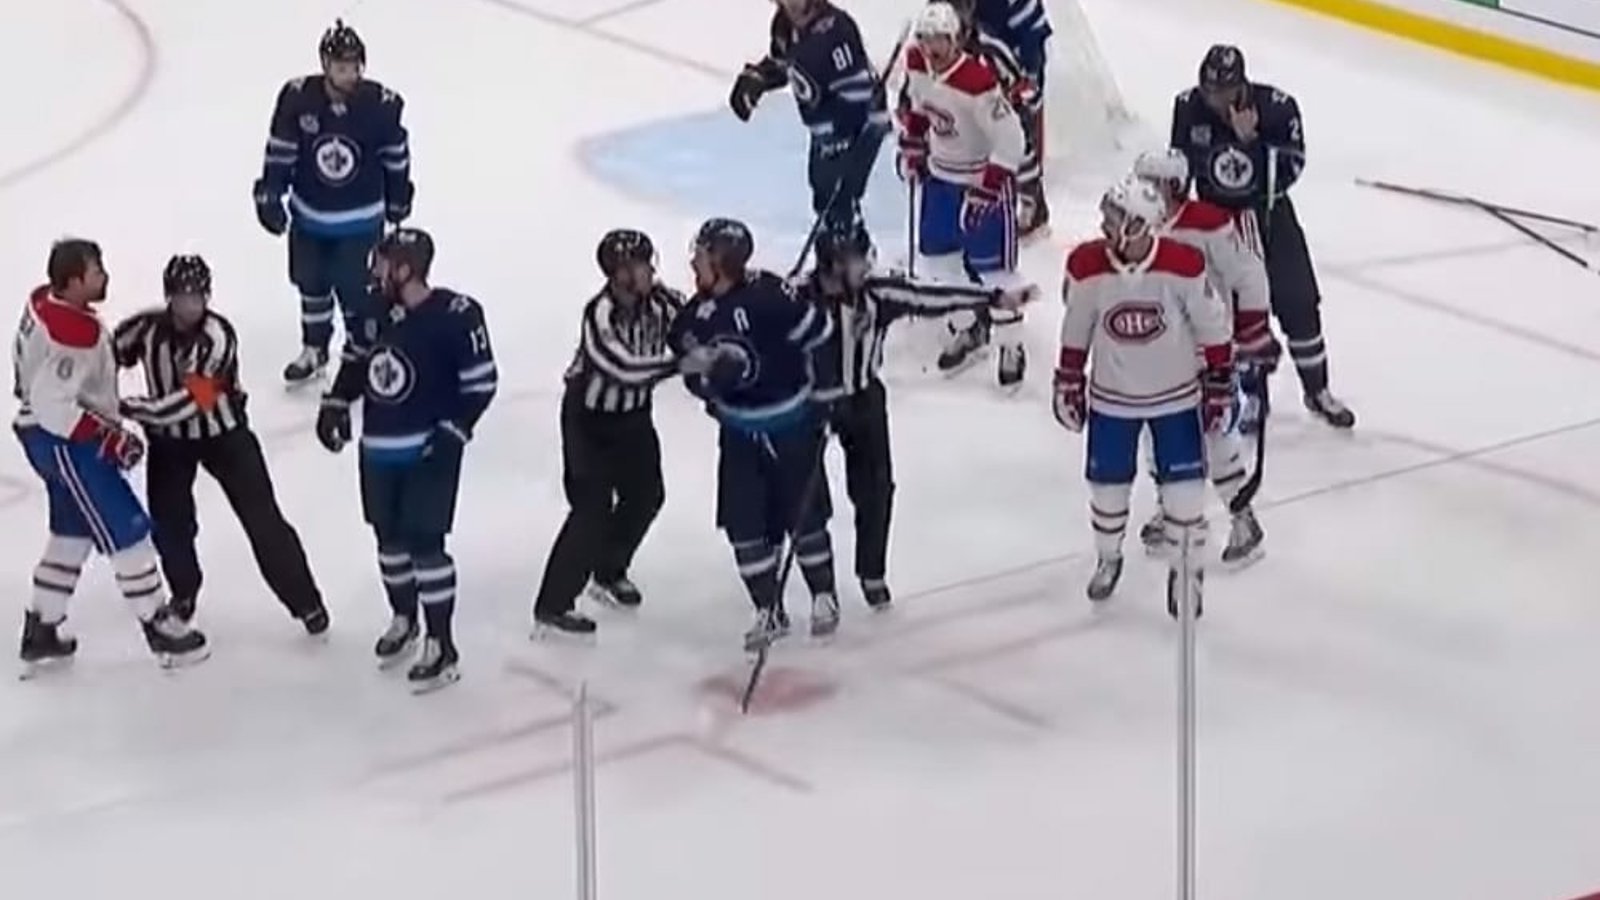 Habs-Jets Game 1 almost ended in bench-clearing brawl, according to insider